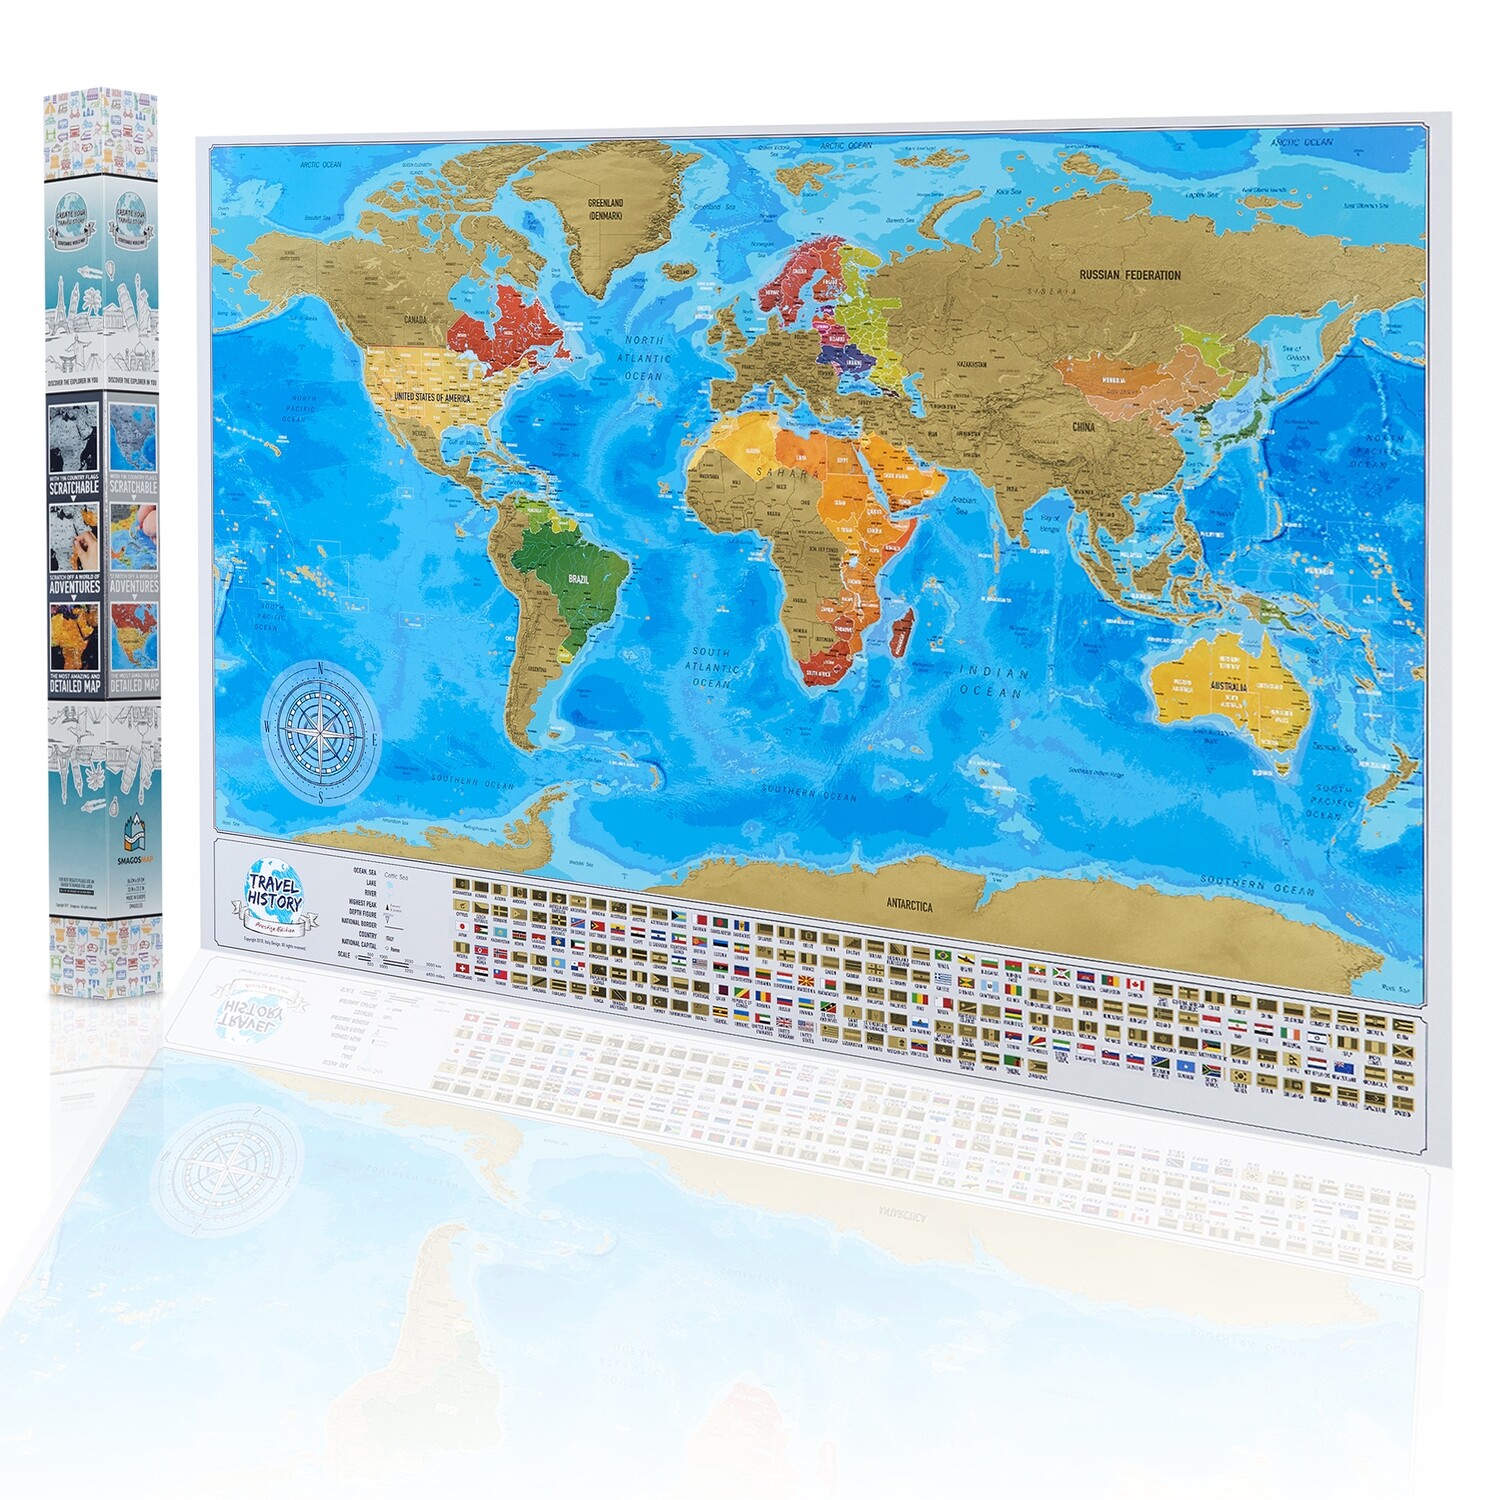 Best Birthday Gift for Friends - Personalized Weddings Gift - NEW Scratch off World Map - Adventure Map with Flags - XXL Scratch Travel Map, Available Map with Frame